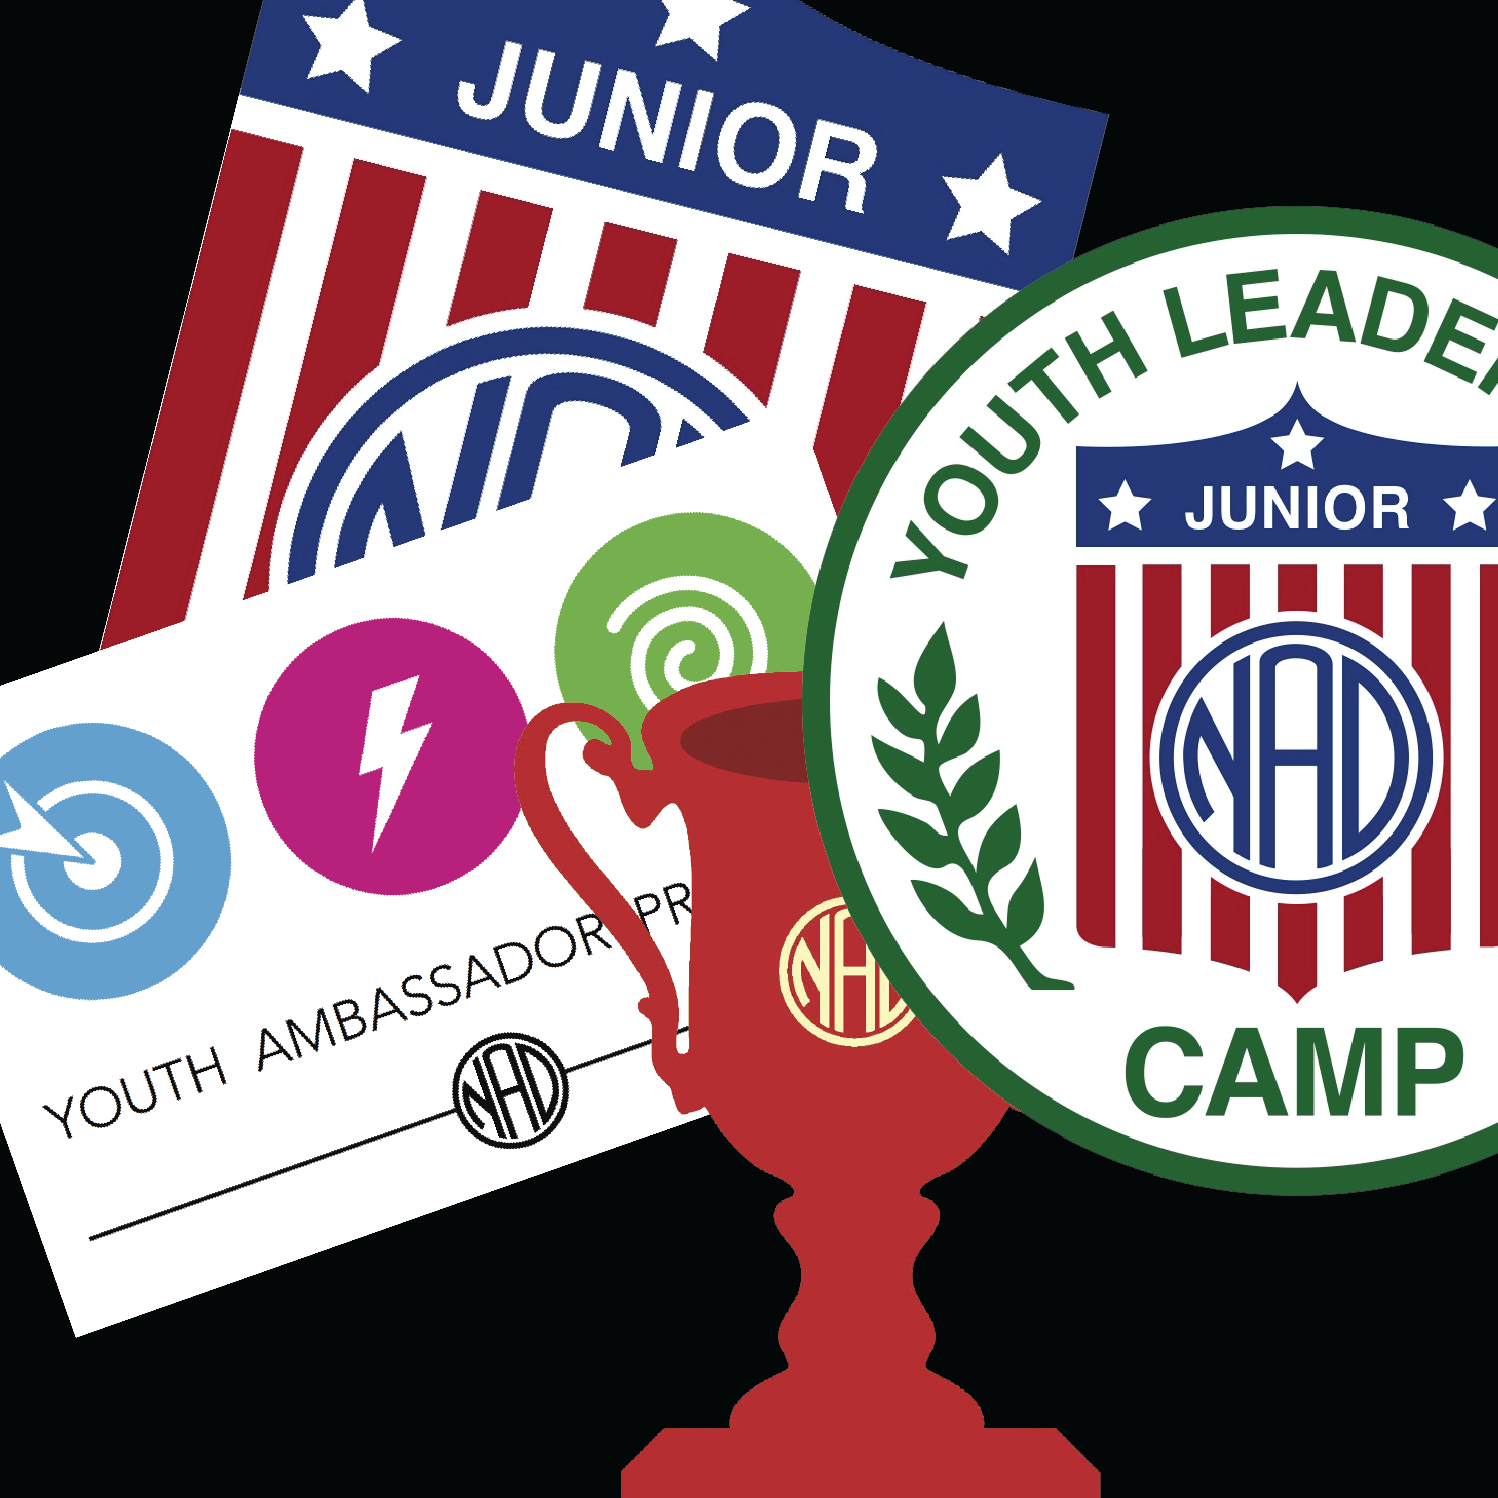 Logos of our Youth programs including Youth Leadership Camp, Youth Ambassador Program, and JrNAD